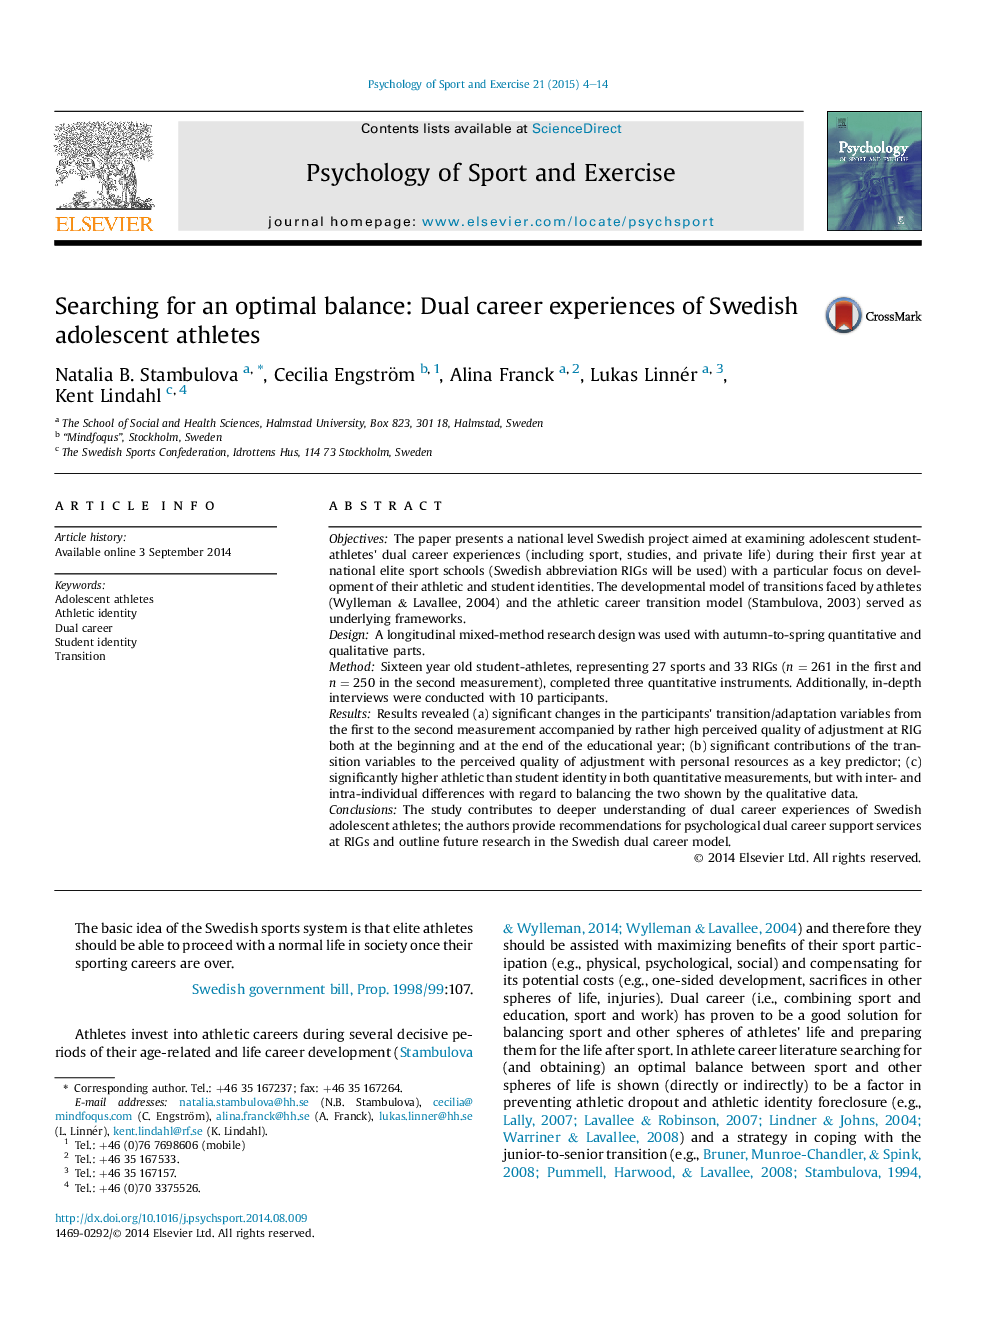 Searching for an optimal balance: Dual career experiences of Swedish adolescent athletes